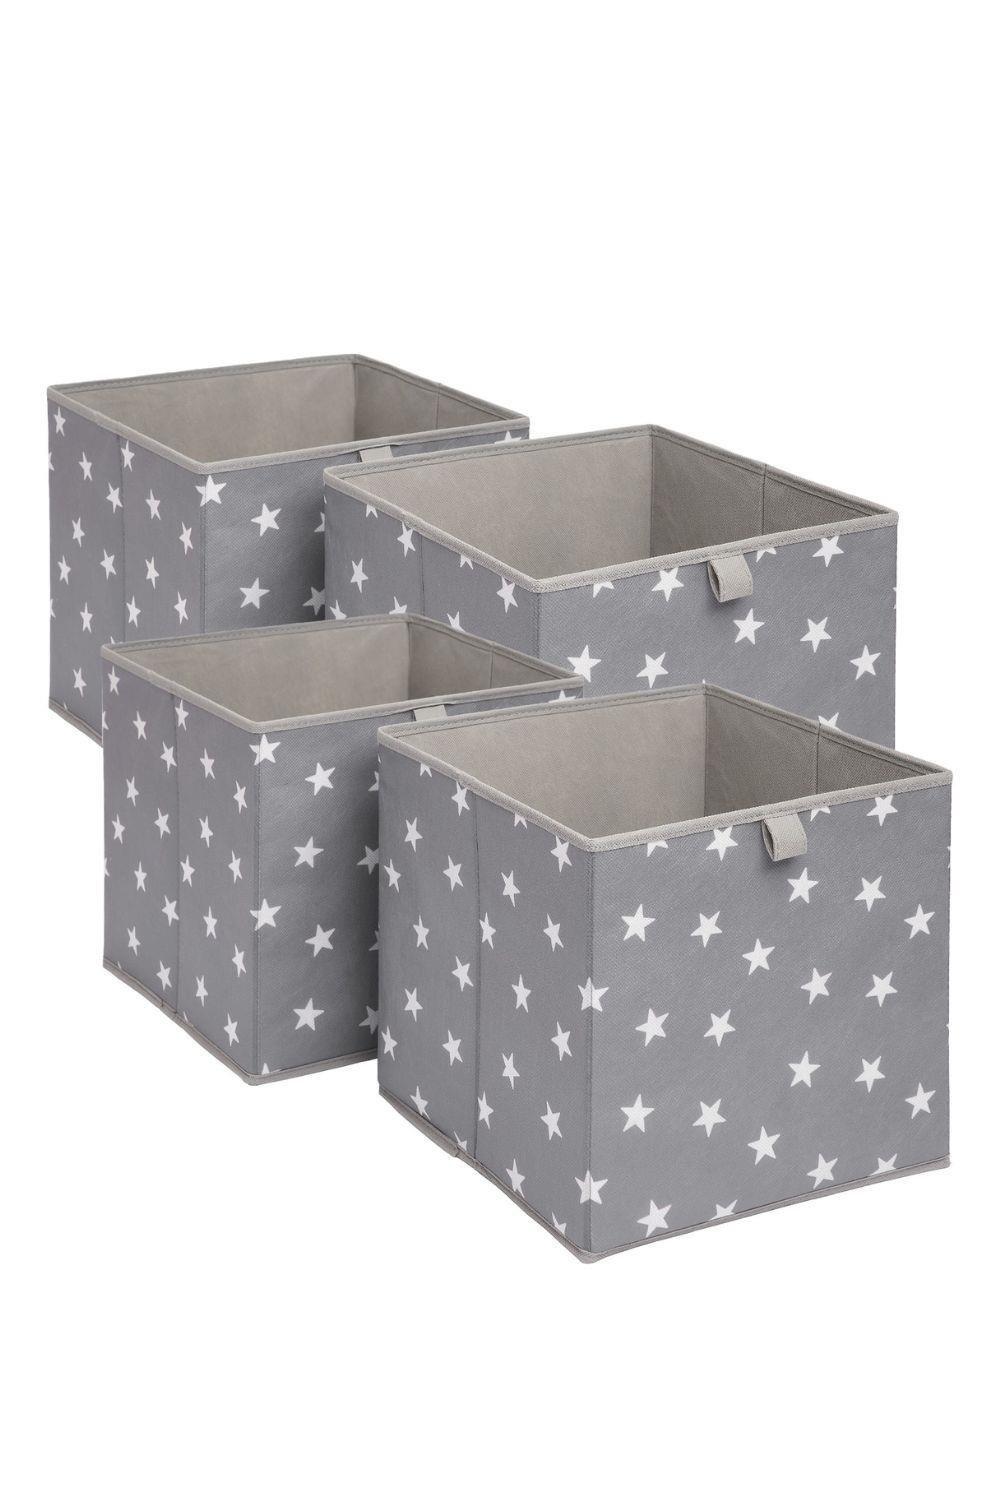 OHS Set of 4 Star Storage Boxes Foldable Collapsible Square Fabric Cube Box|charcoal